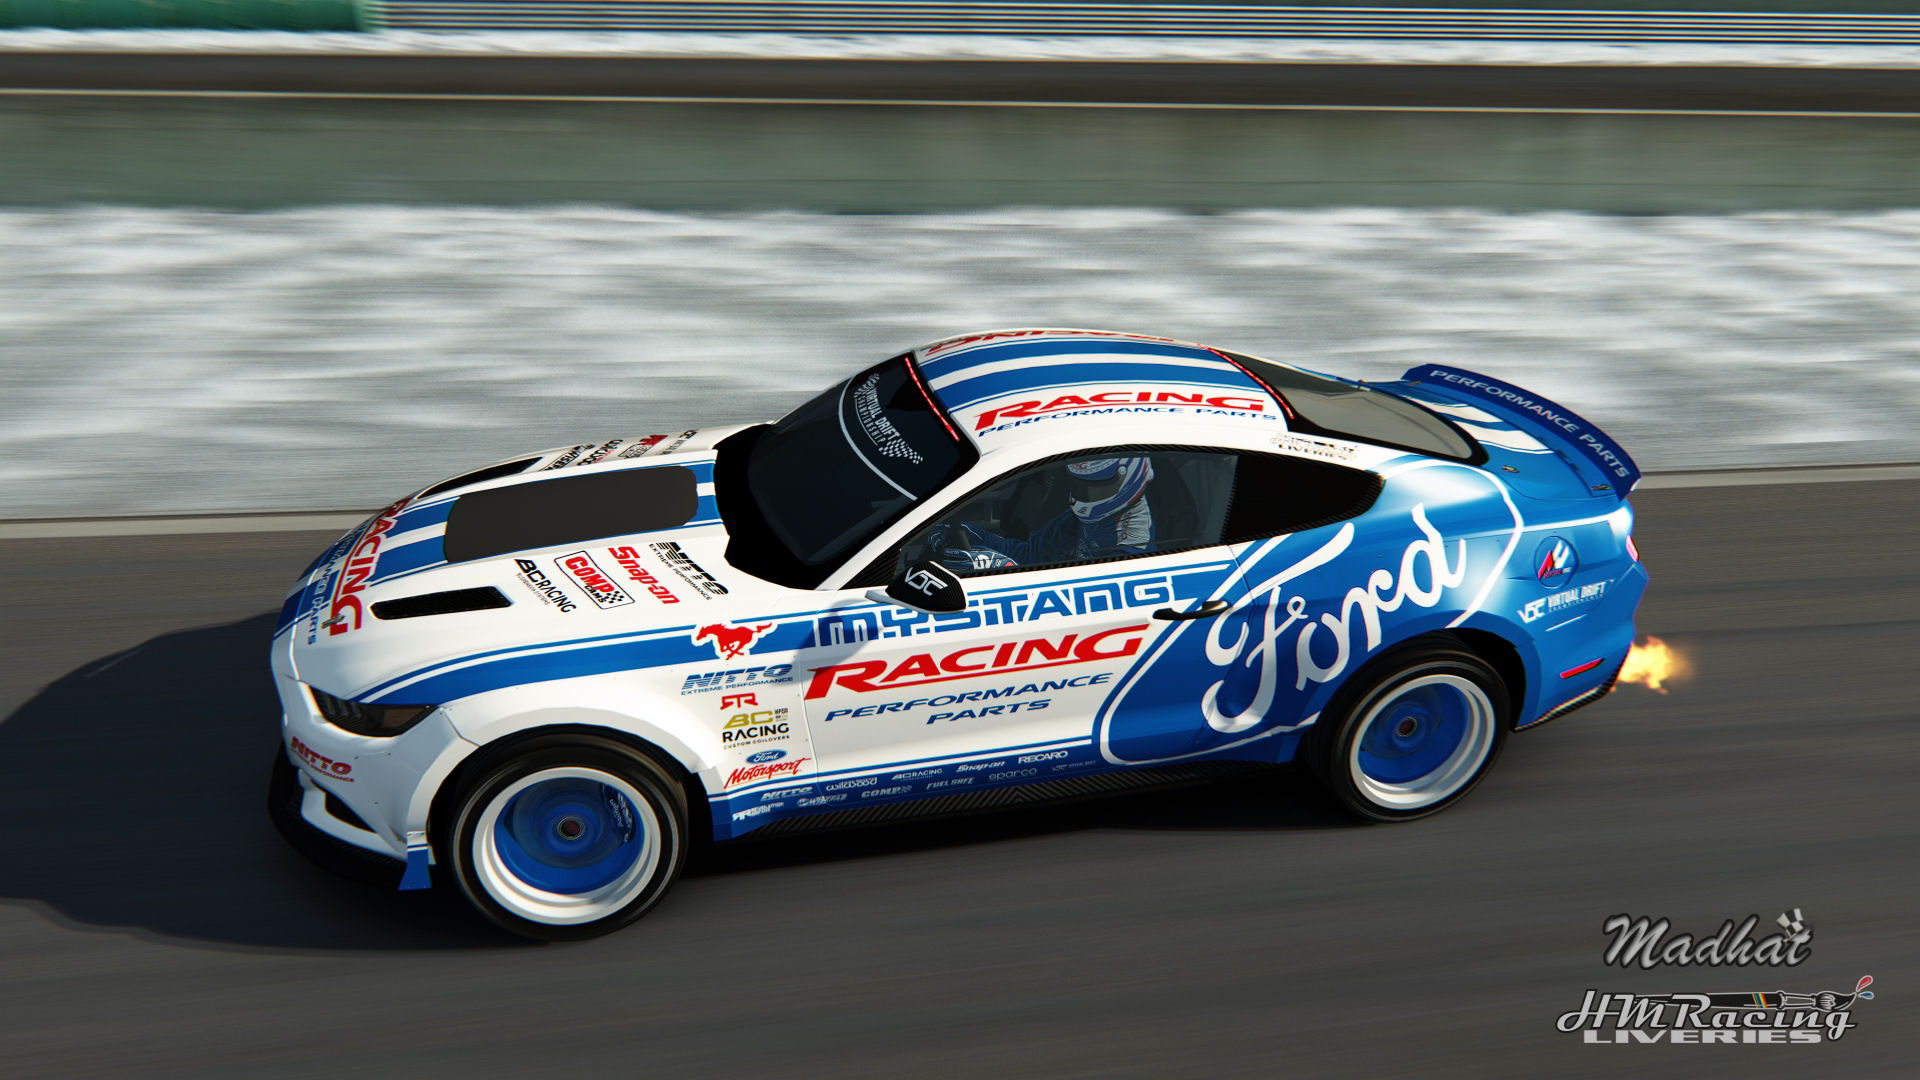 Ford Racing Performance Parts VDC RTR Mustang Madhat HMRacing Liveries 08.jpg